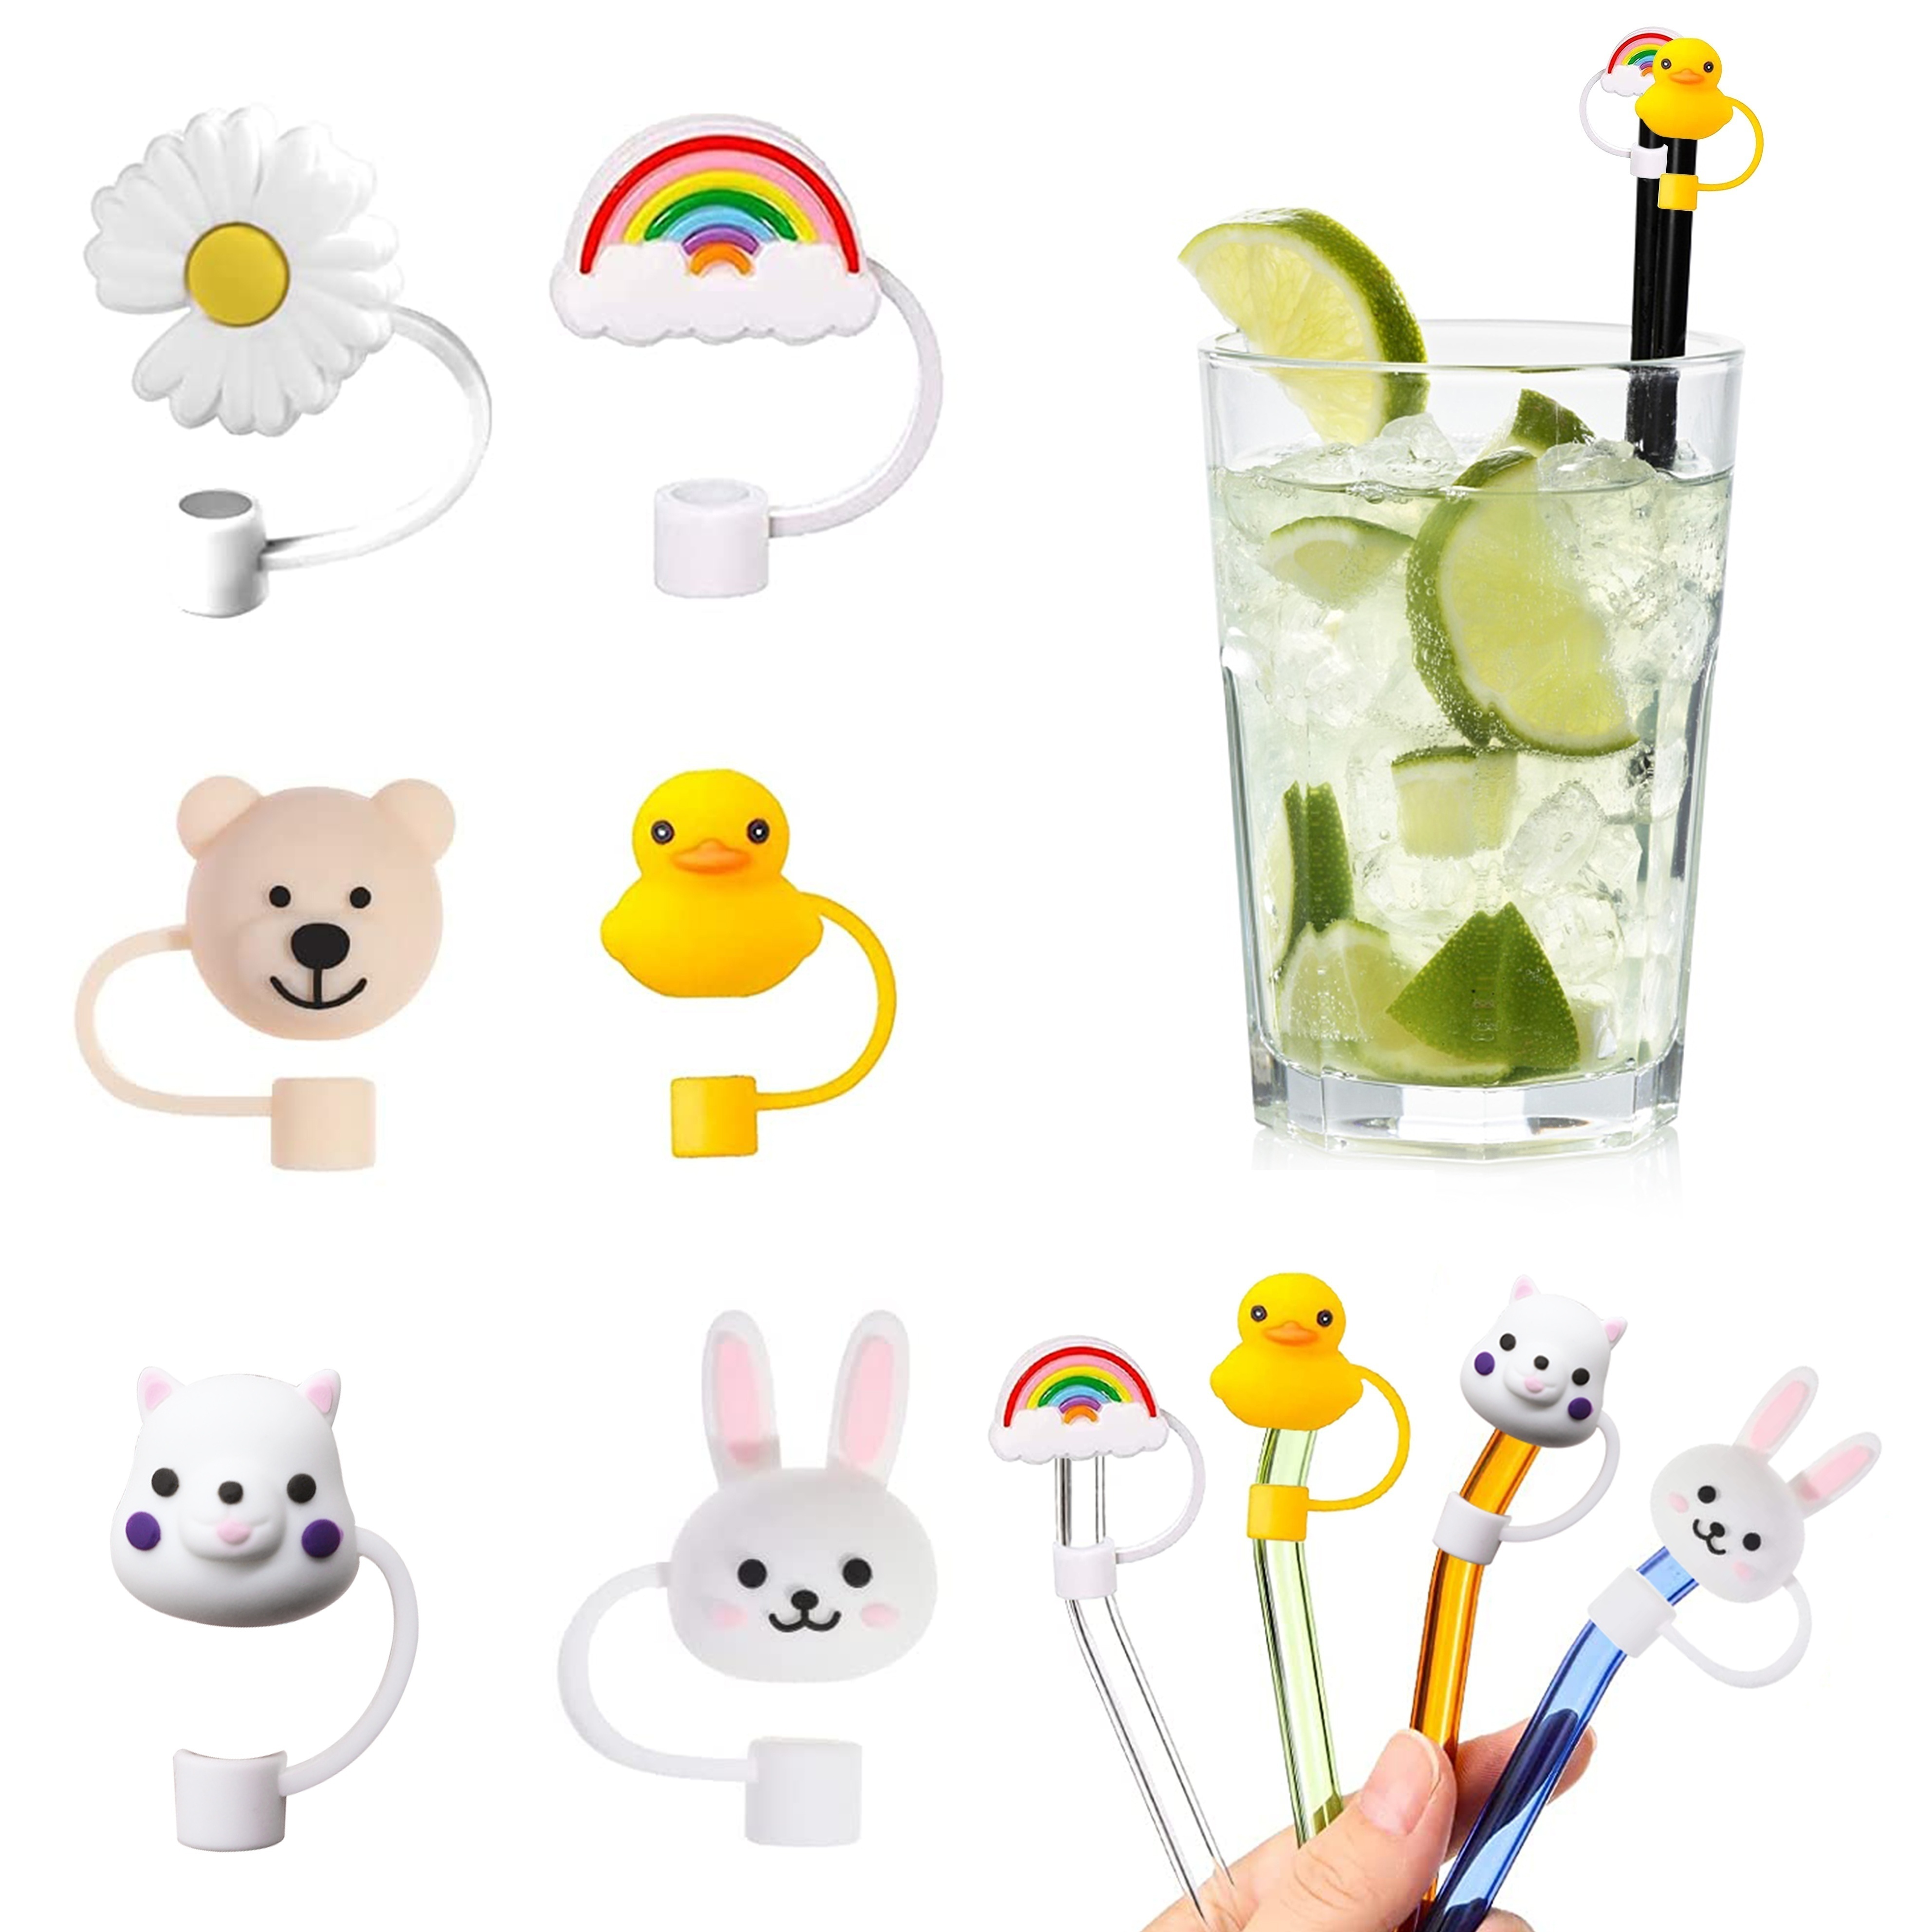 12 Pack Reusable Silicone Straw Tips Cover for 6 to 8 mm Straws, Portable  Cute Straw Caps Covers Creative Straw Plug Drinking Dust Cap for Home